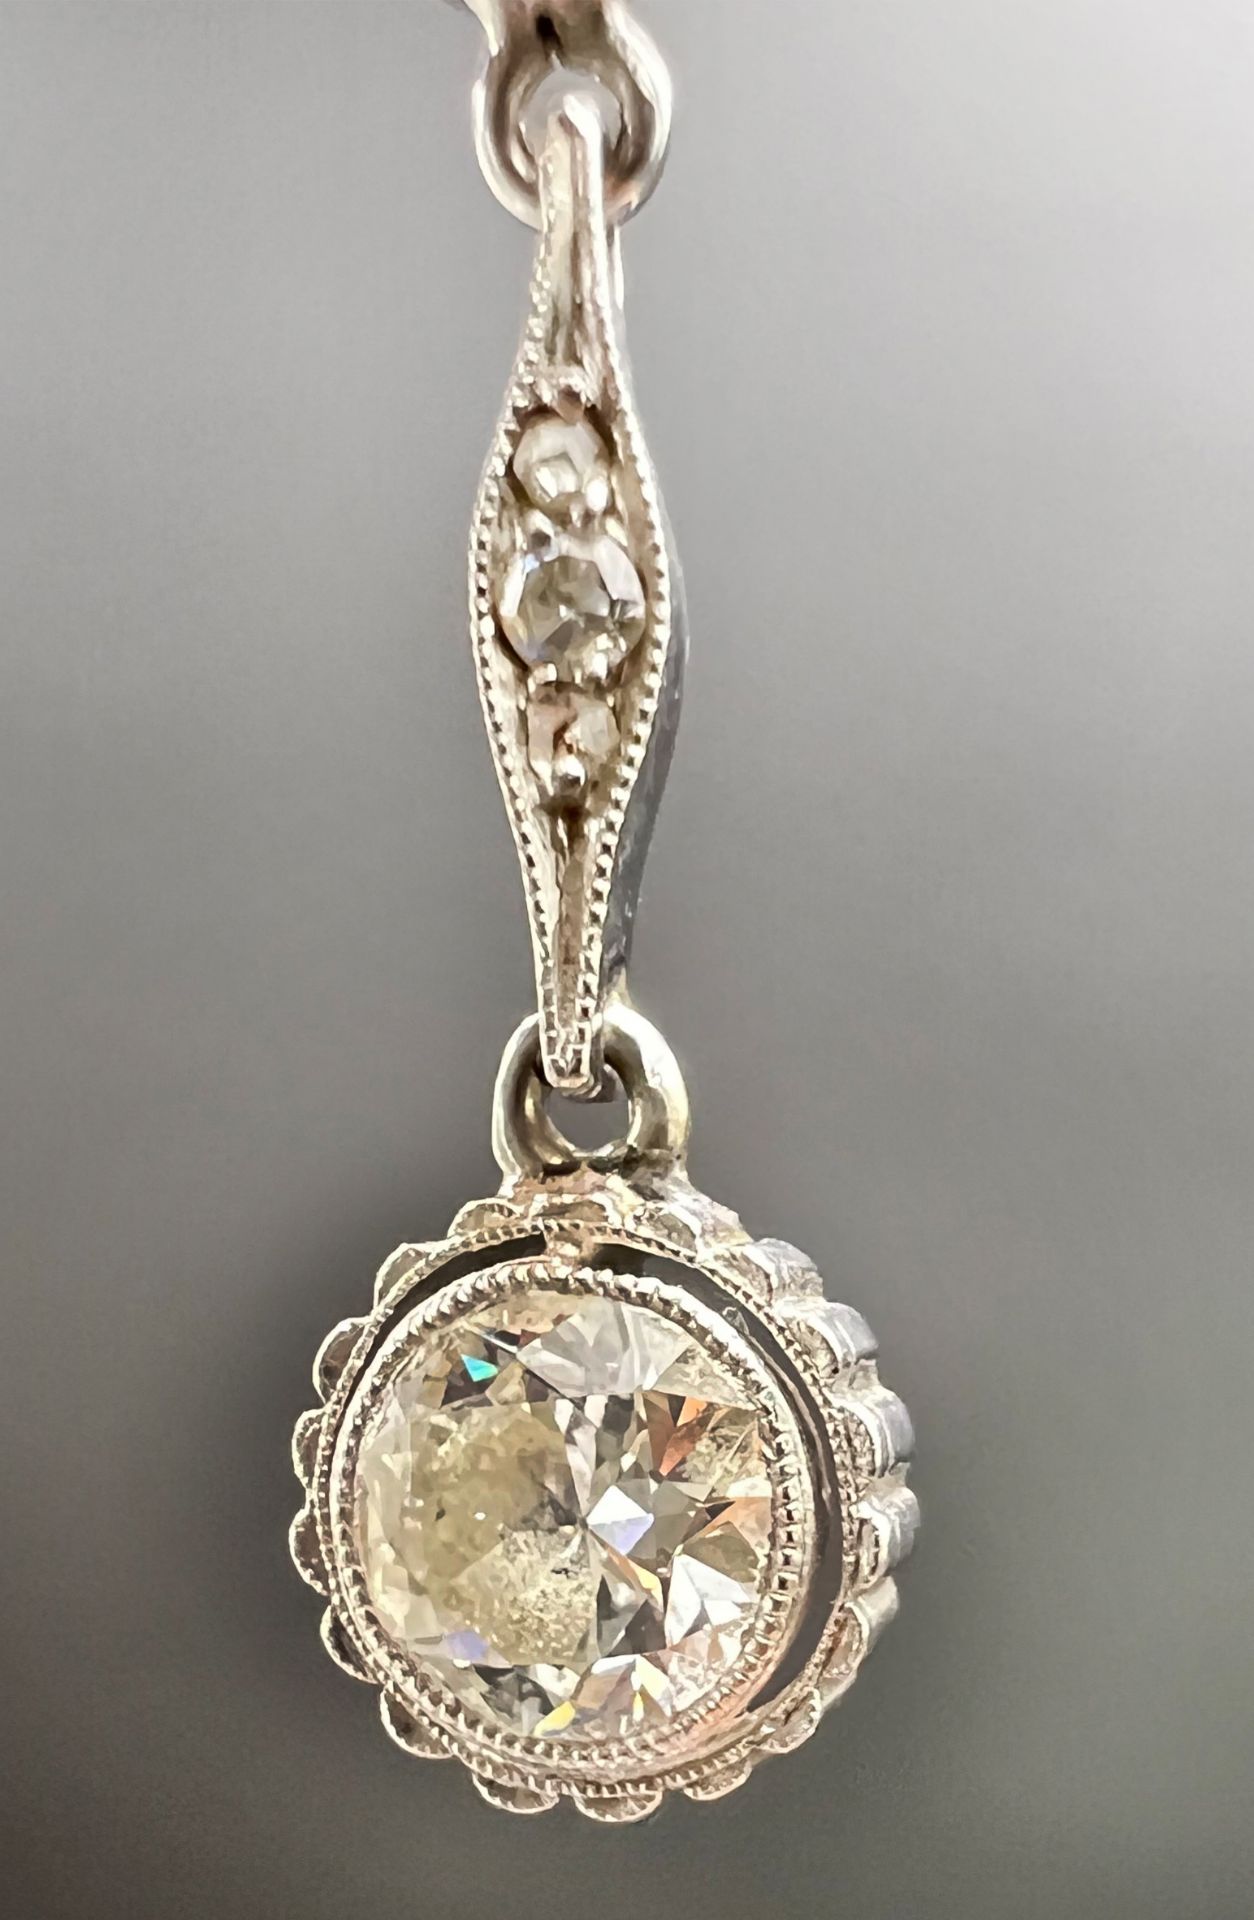 Pendant with chain. 585 white gold with 2 diamonds. Art deco. - Image 8 of 12